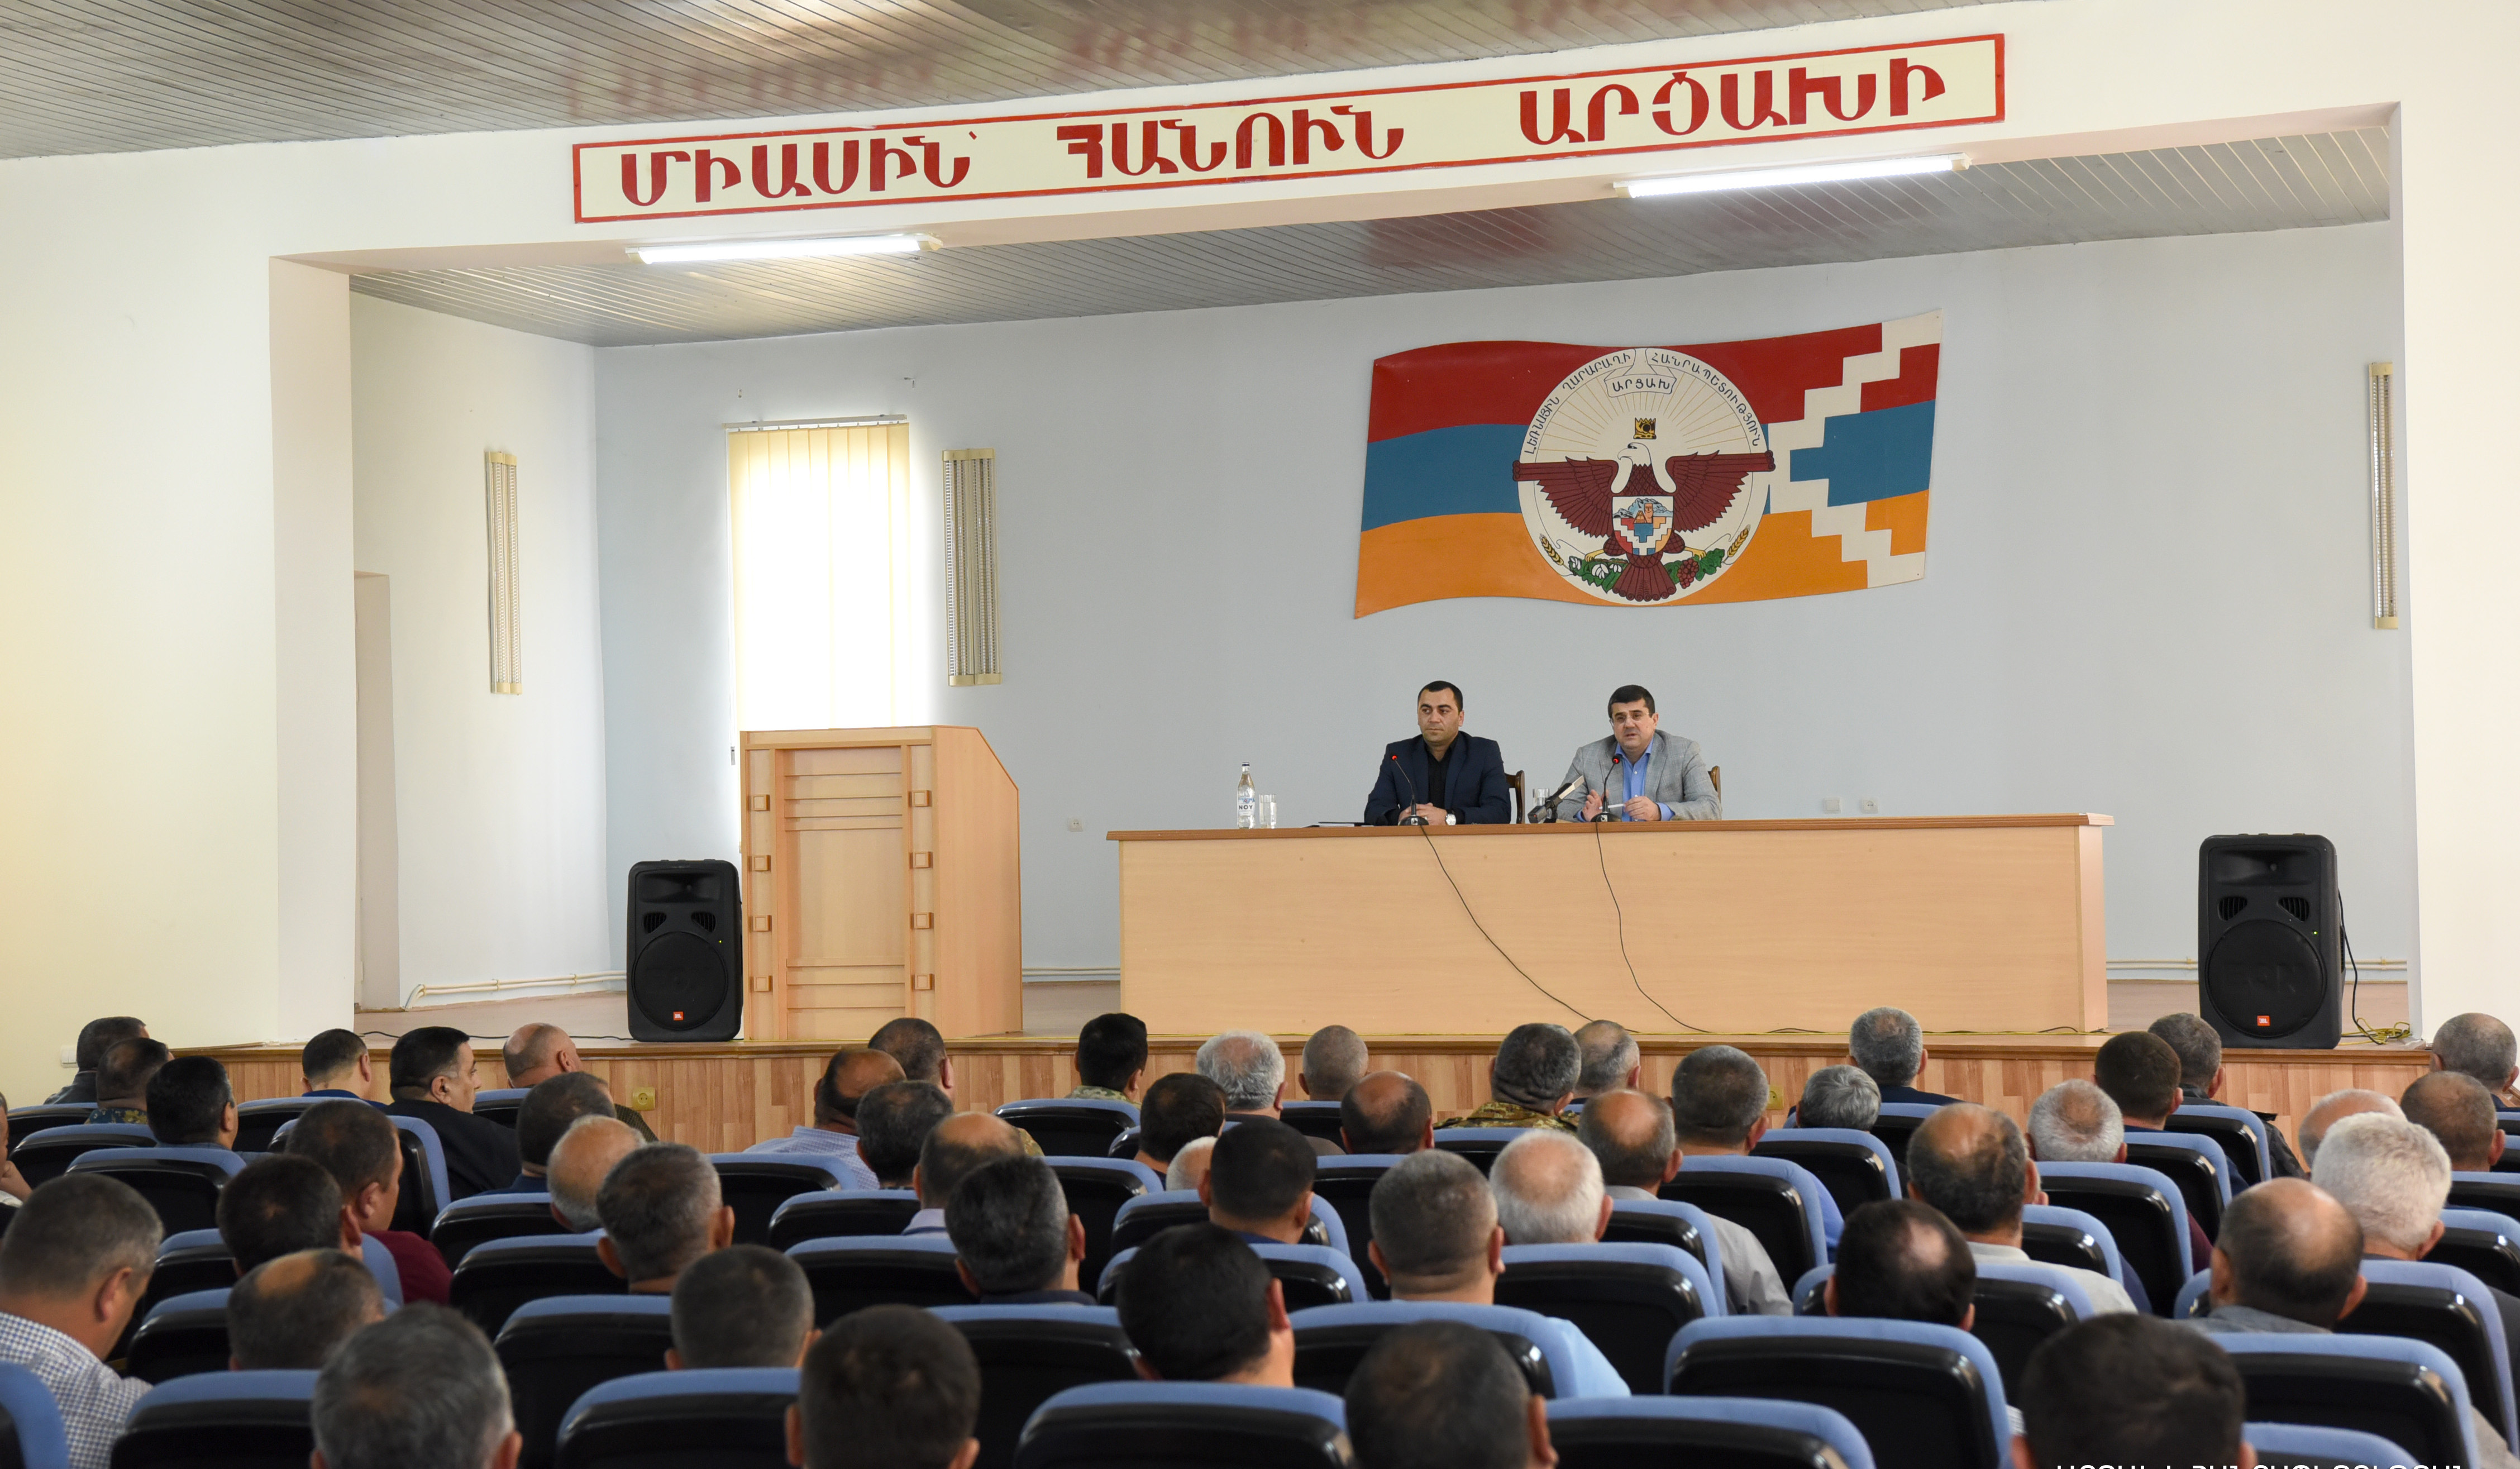 We will adhere to struggle for independence based on right of peoples to self-determination: President Harutyunyan held meeting in Martakert